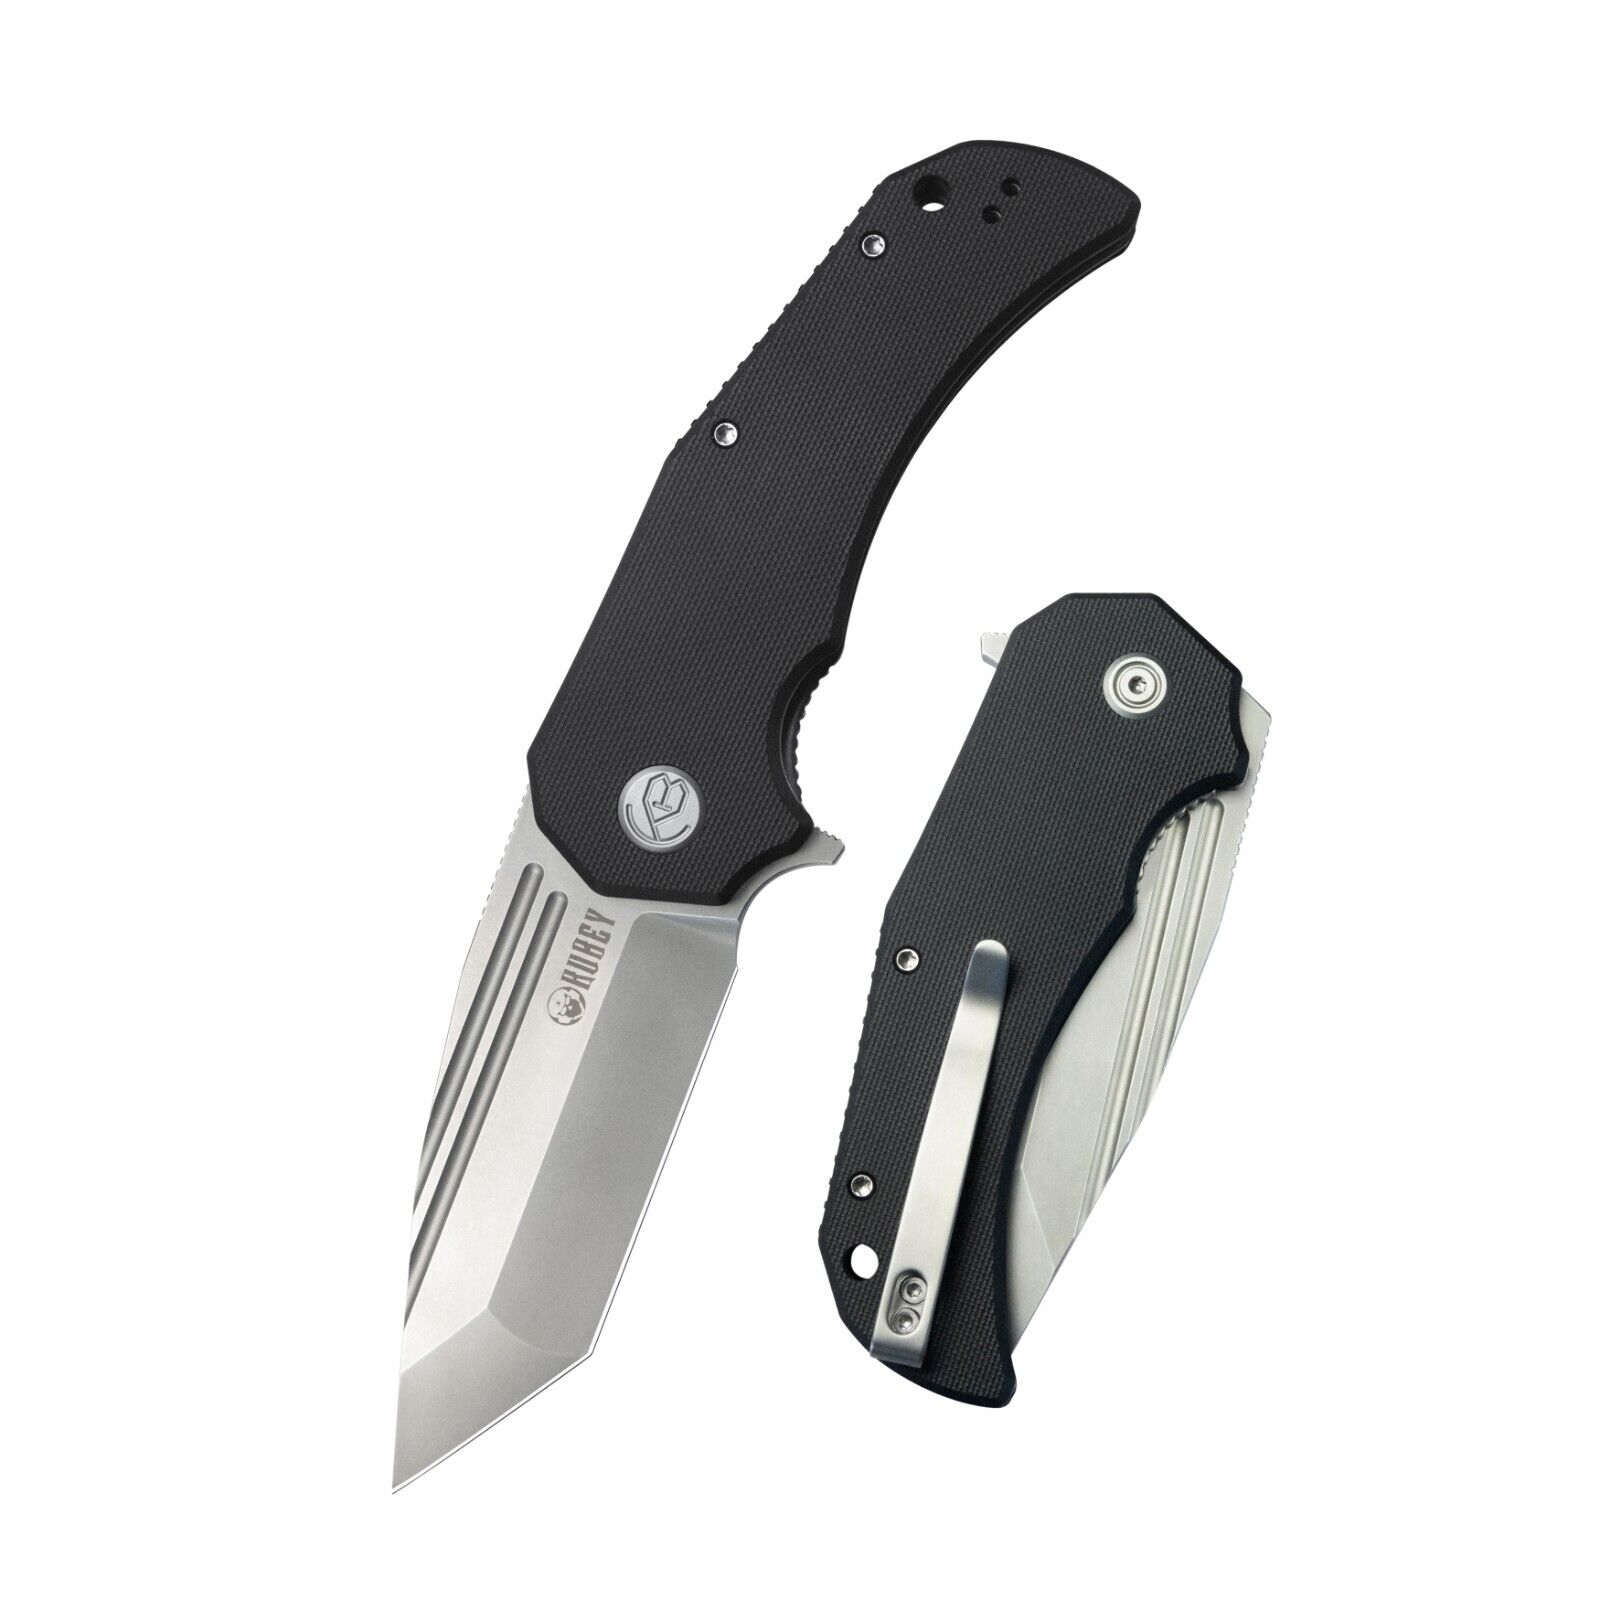 Kubey Bravo one Outdoor Folding Knife Stainless Steel Blade Pocket Knives